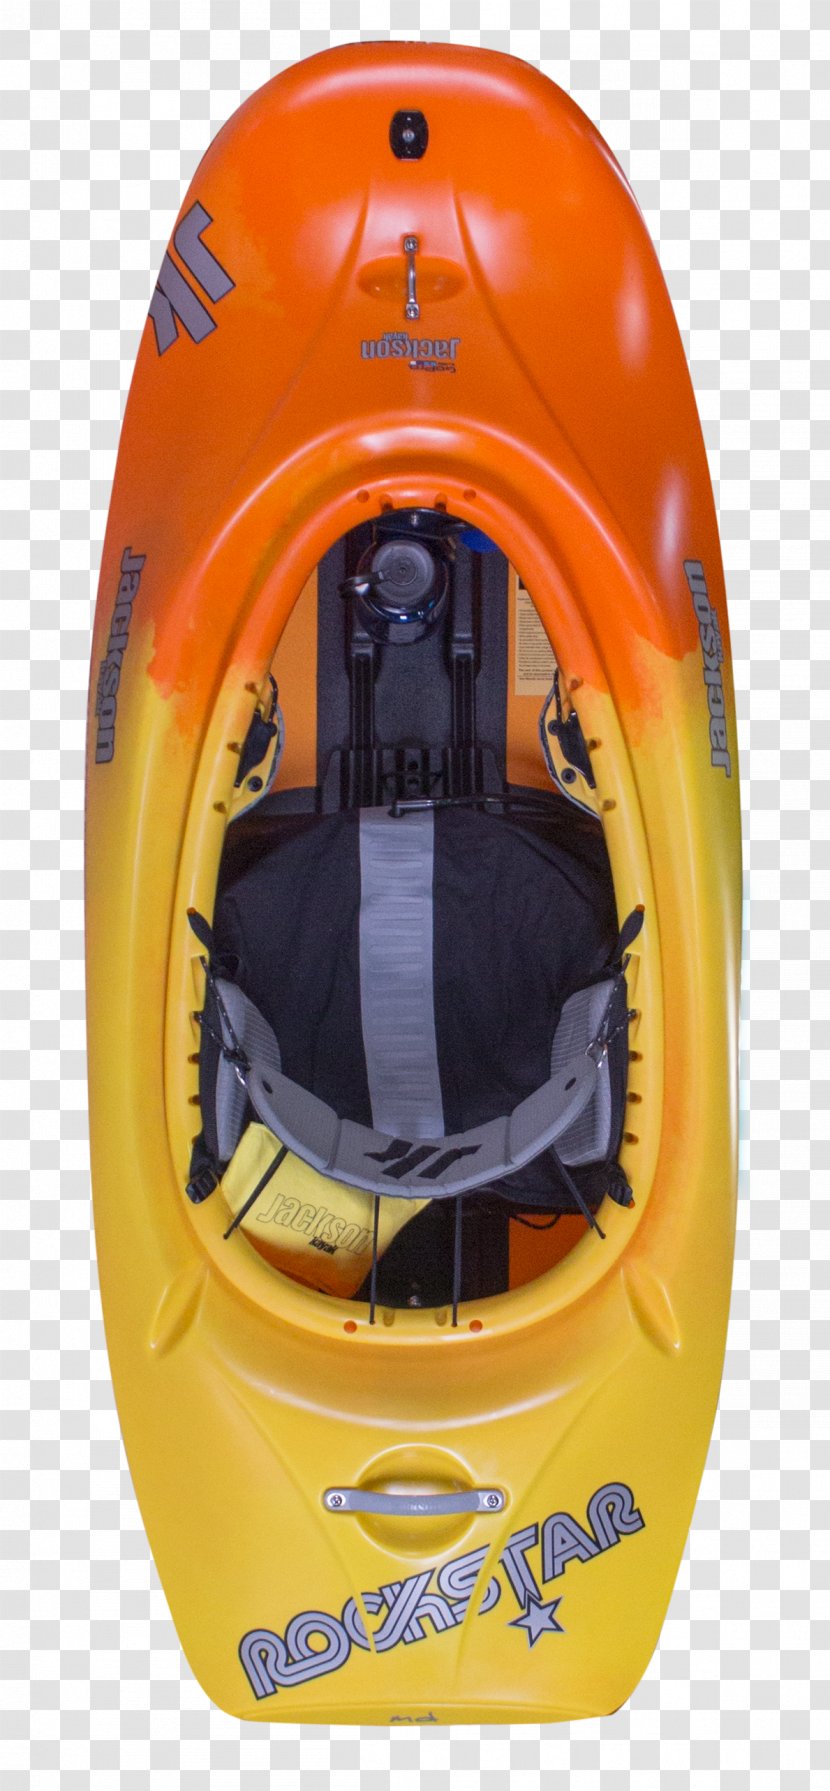 Jackson Kayak, Inc. Playboating Canoe Livery Whitewater - Personal Protective Equipment Transparent PNG